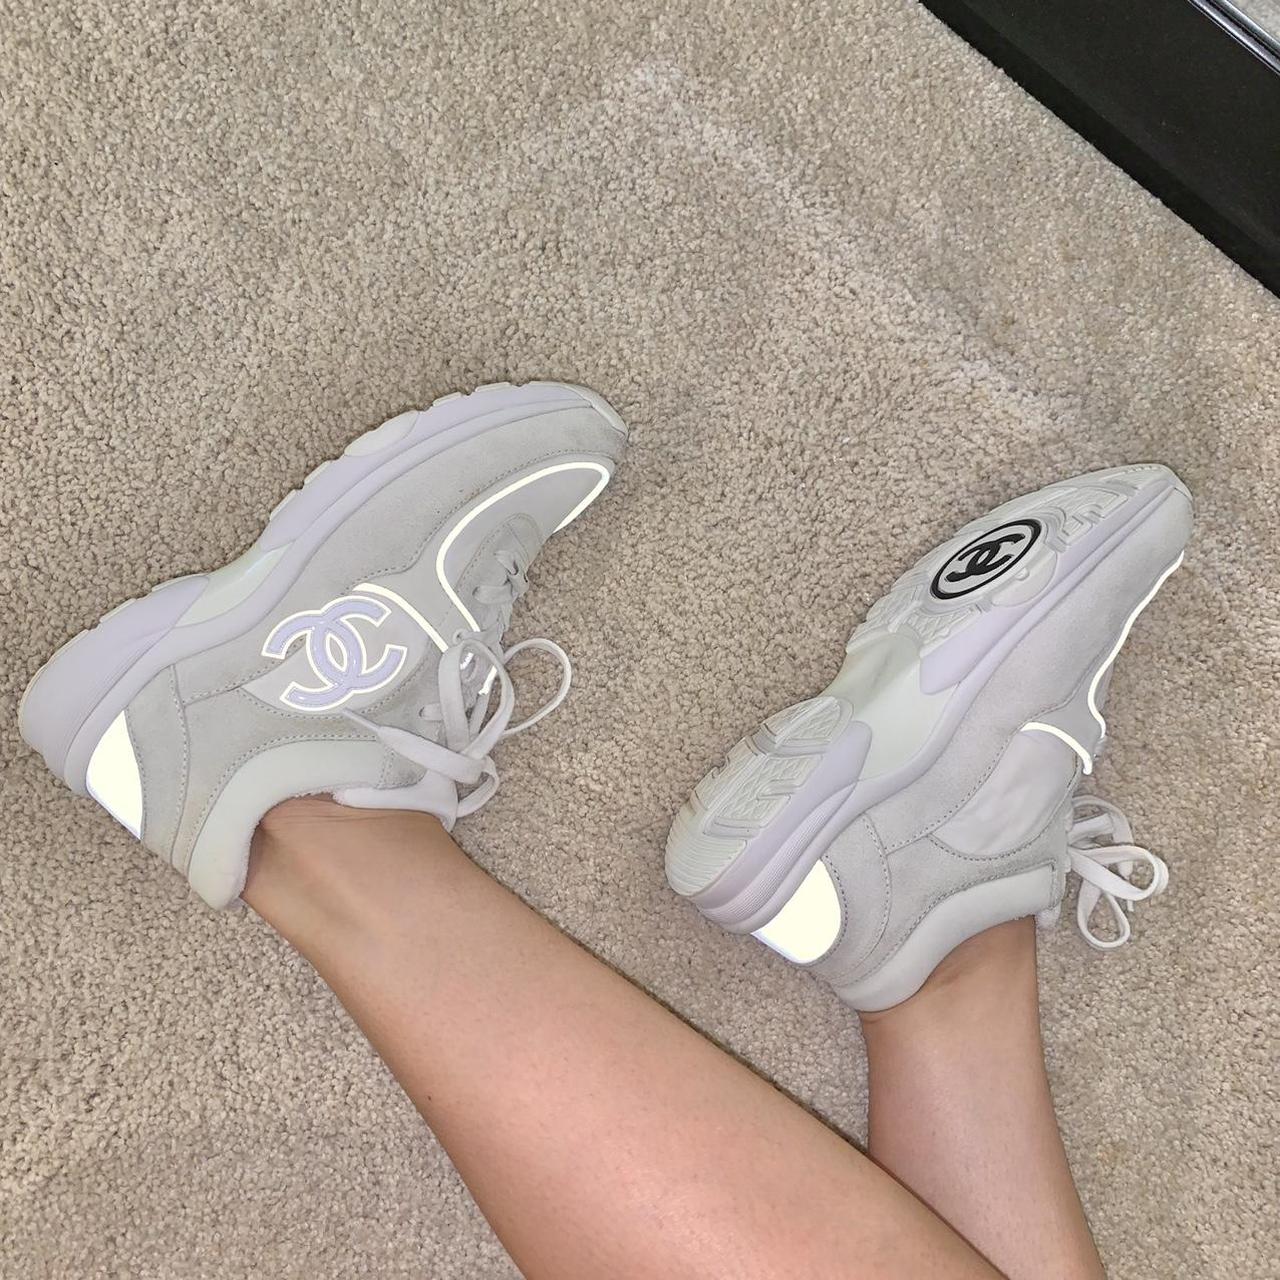 Chanel Women's White and Cream Trainers | Depop